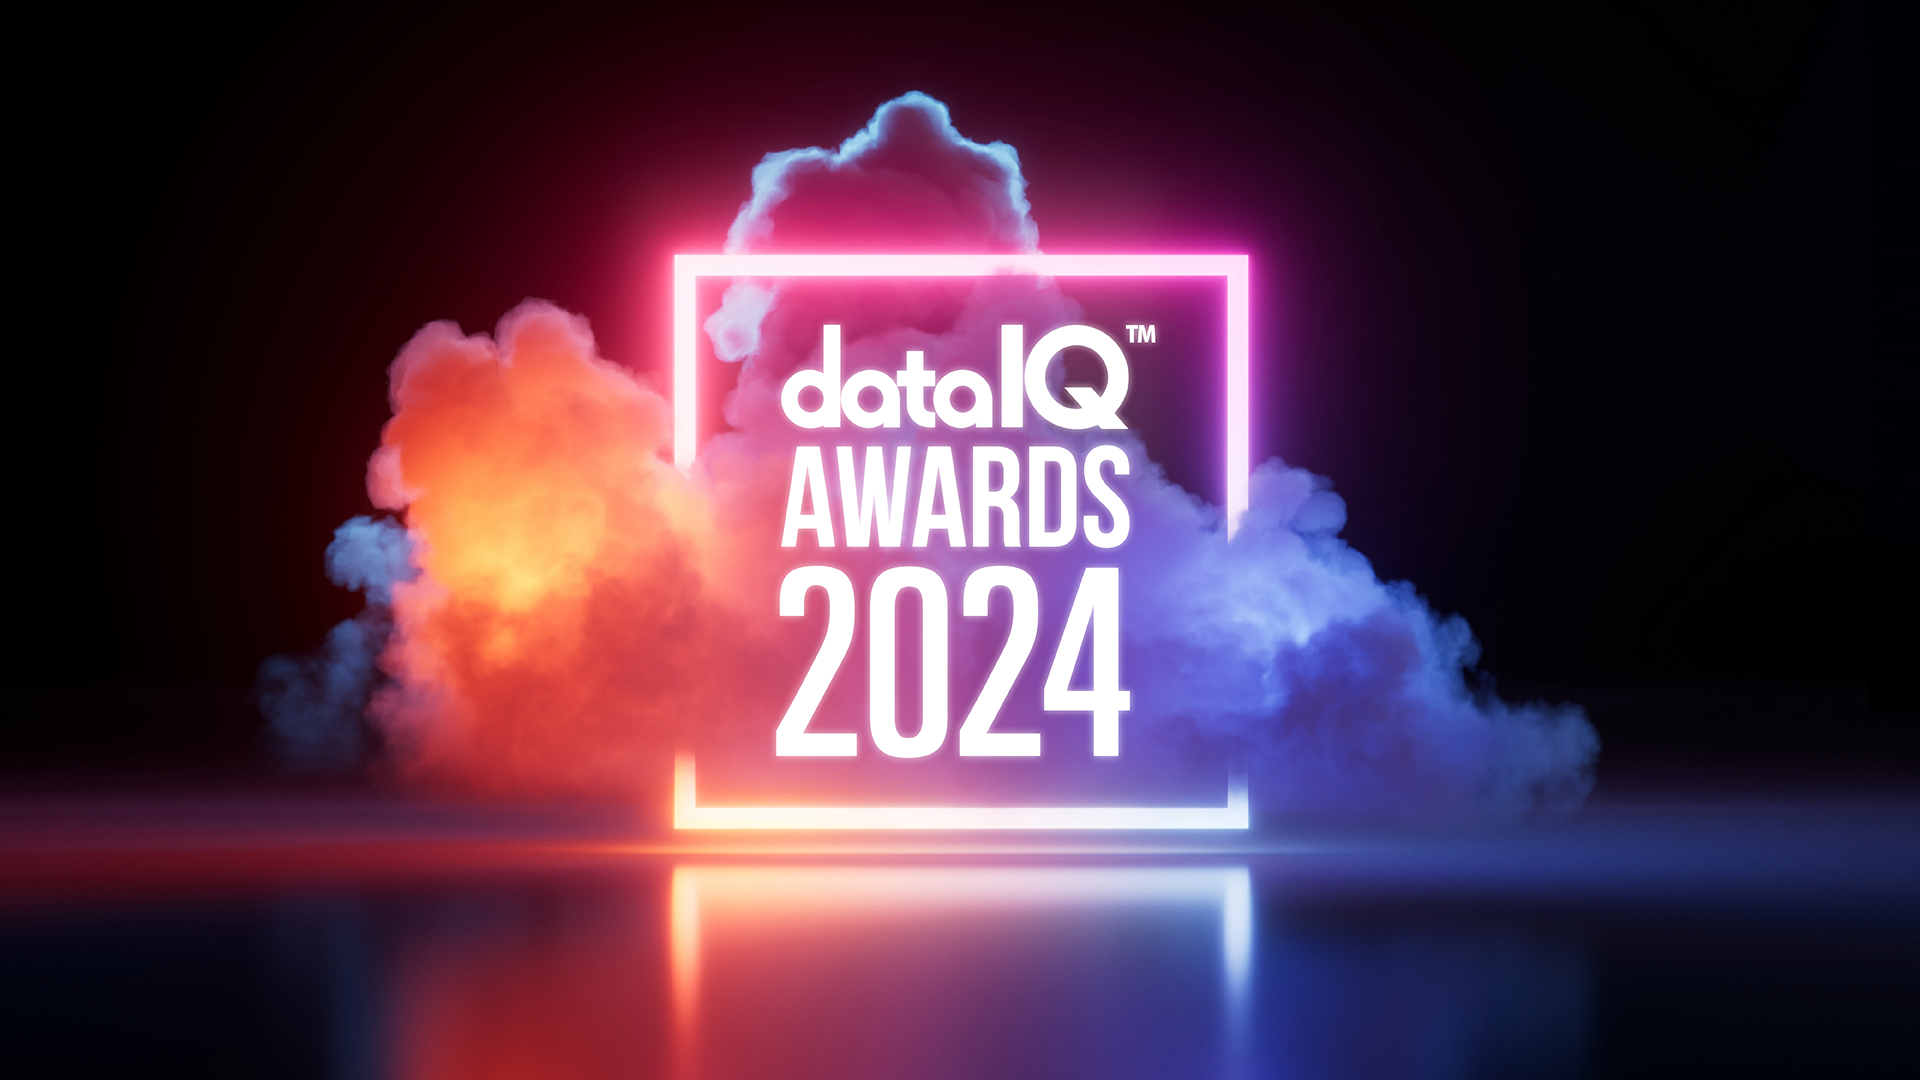 DataIQ Awards 2023 logo and artwork. The background is a dramatic shot of the DataIQ Awards logo with neon lights and smoke rising